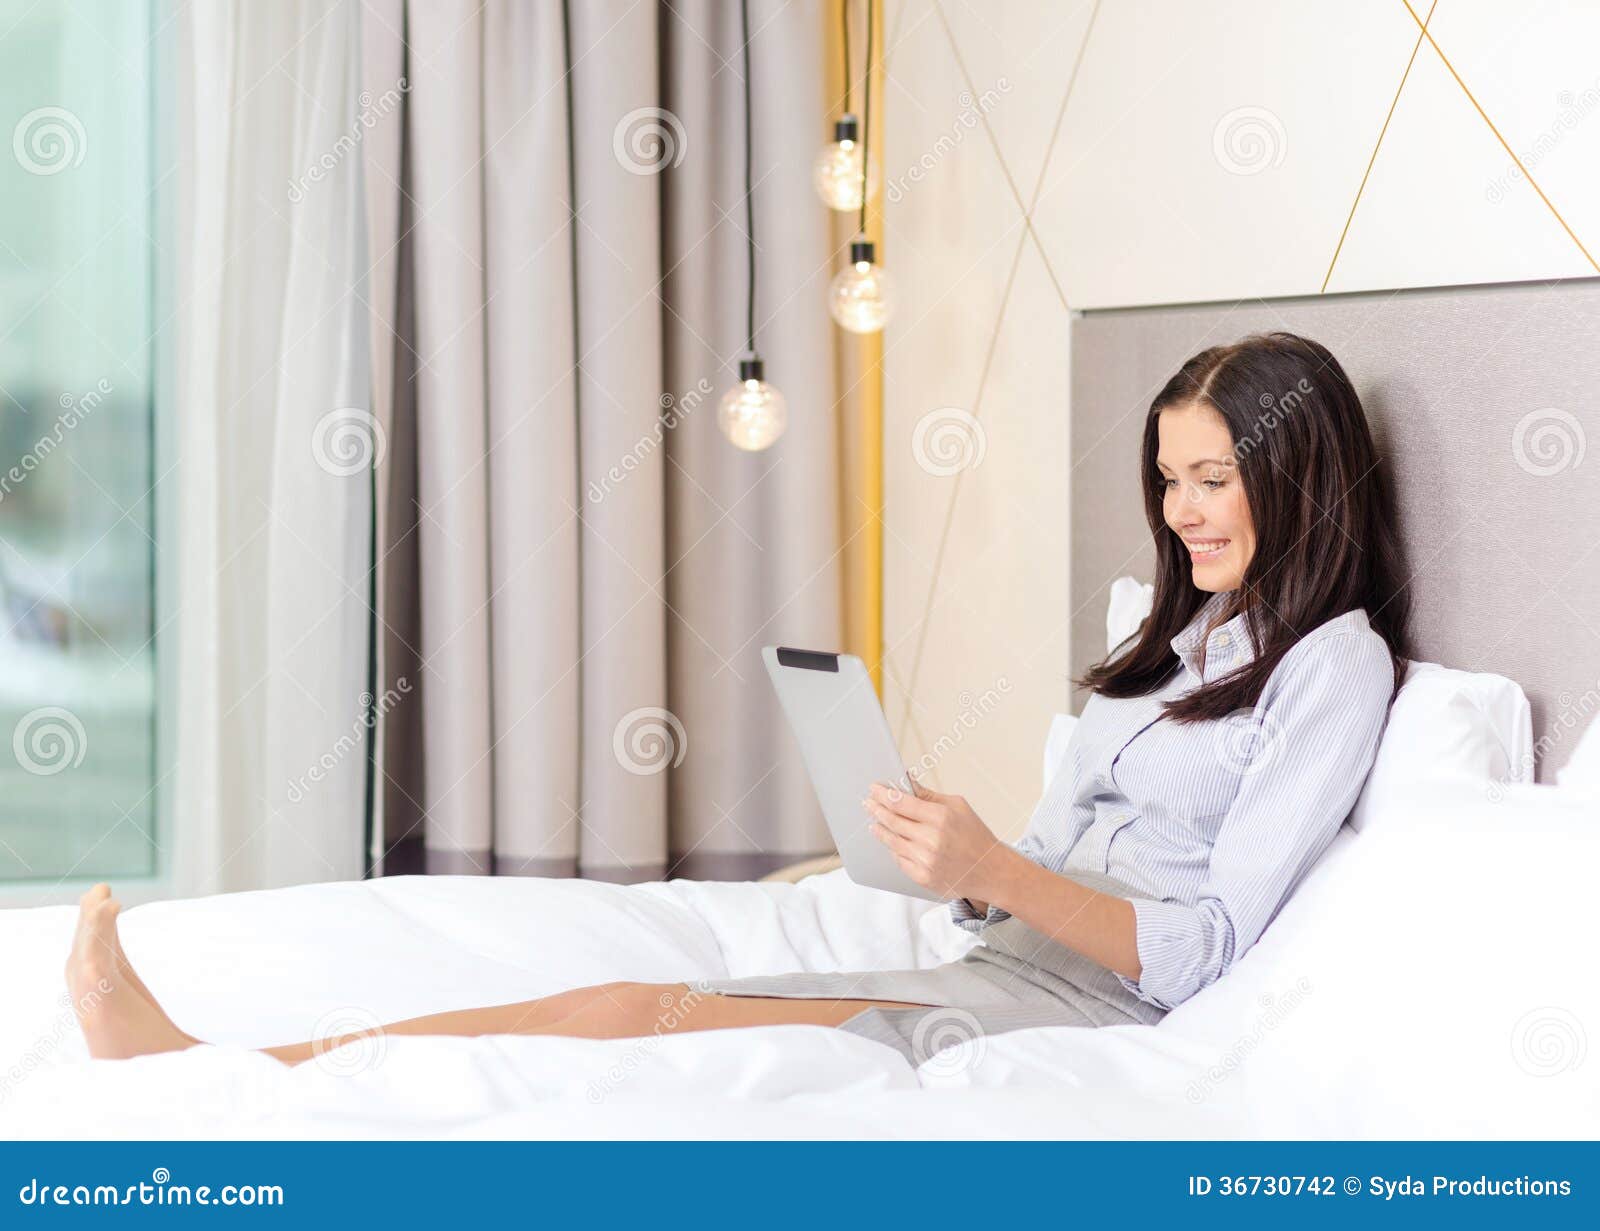 Happy Businesswoman With Tablet Pc In Hotel Room Stock ...